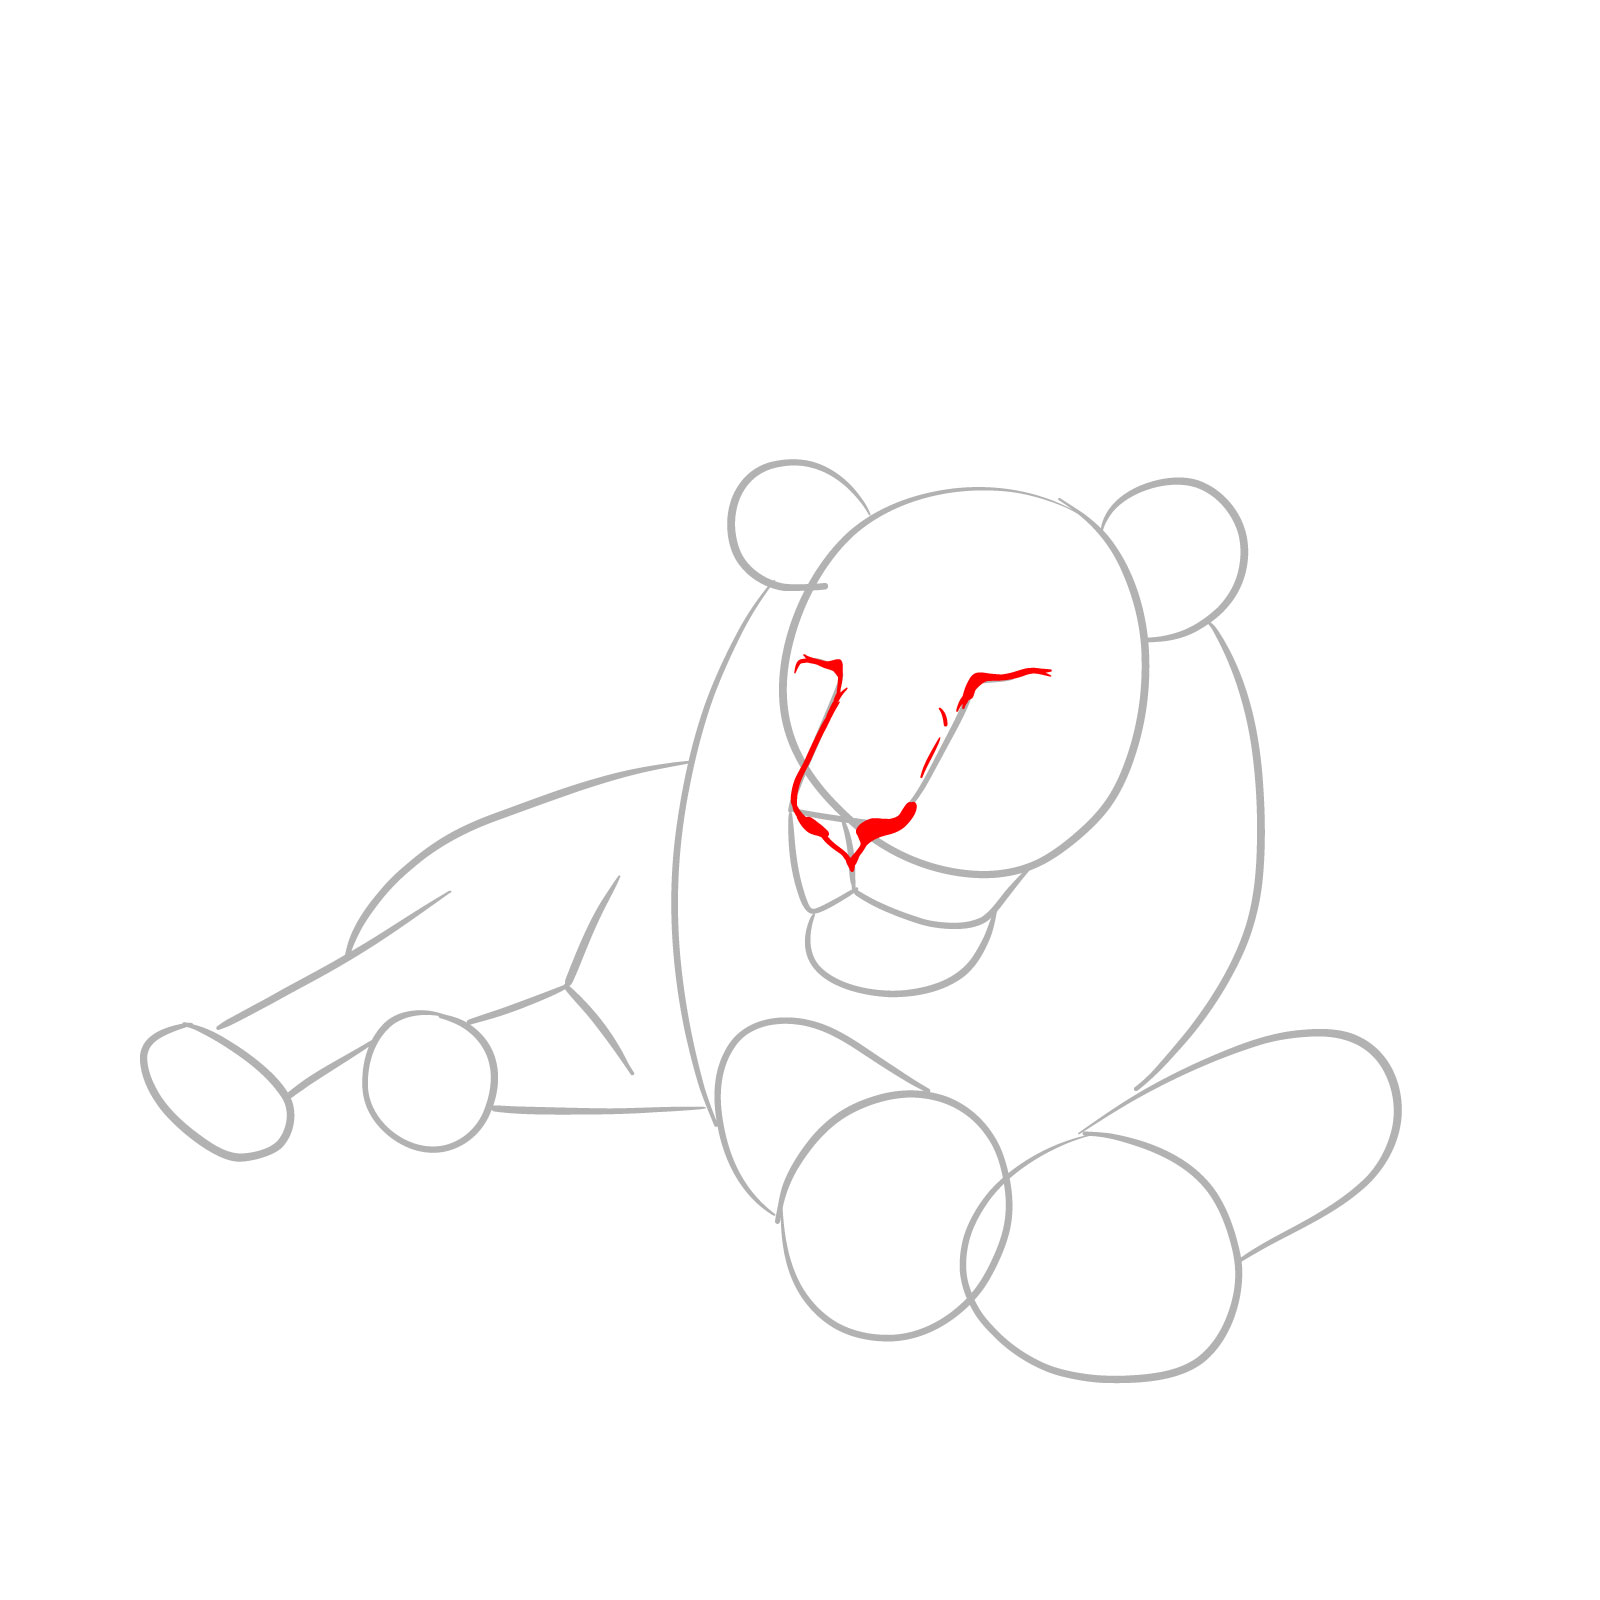 How to draw a sleeping lion in front view - Step 3: Eyes, nose bridge, and nostrils